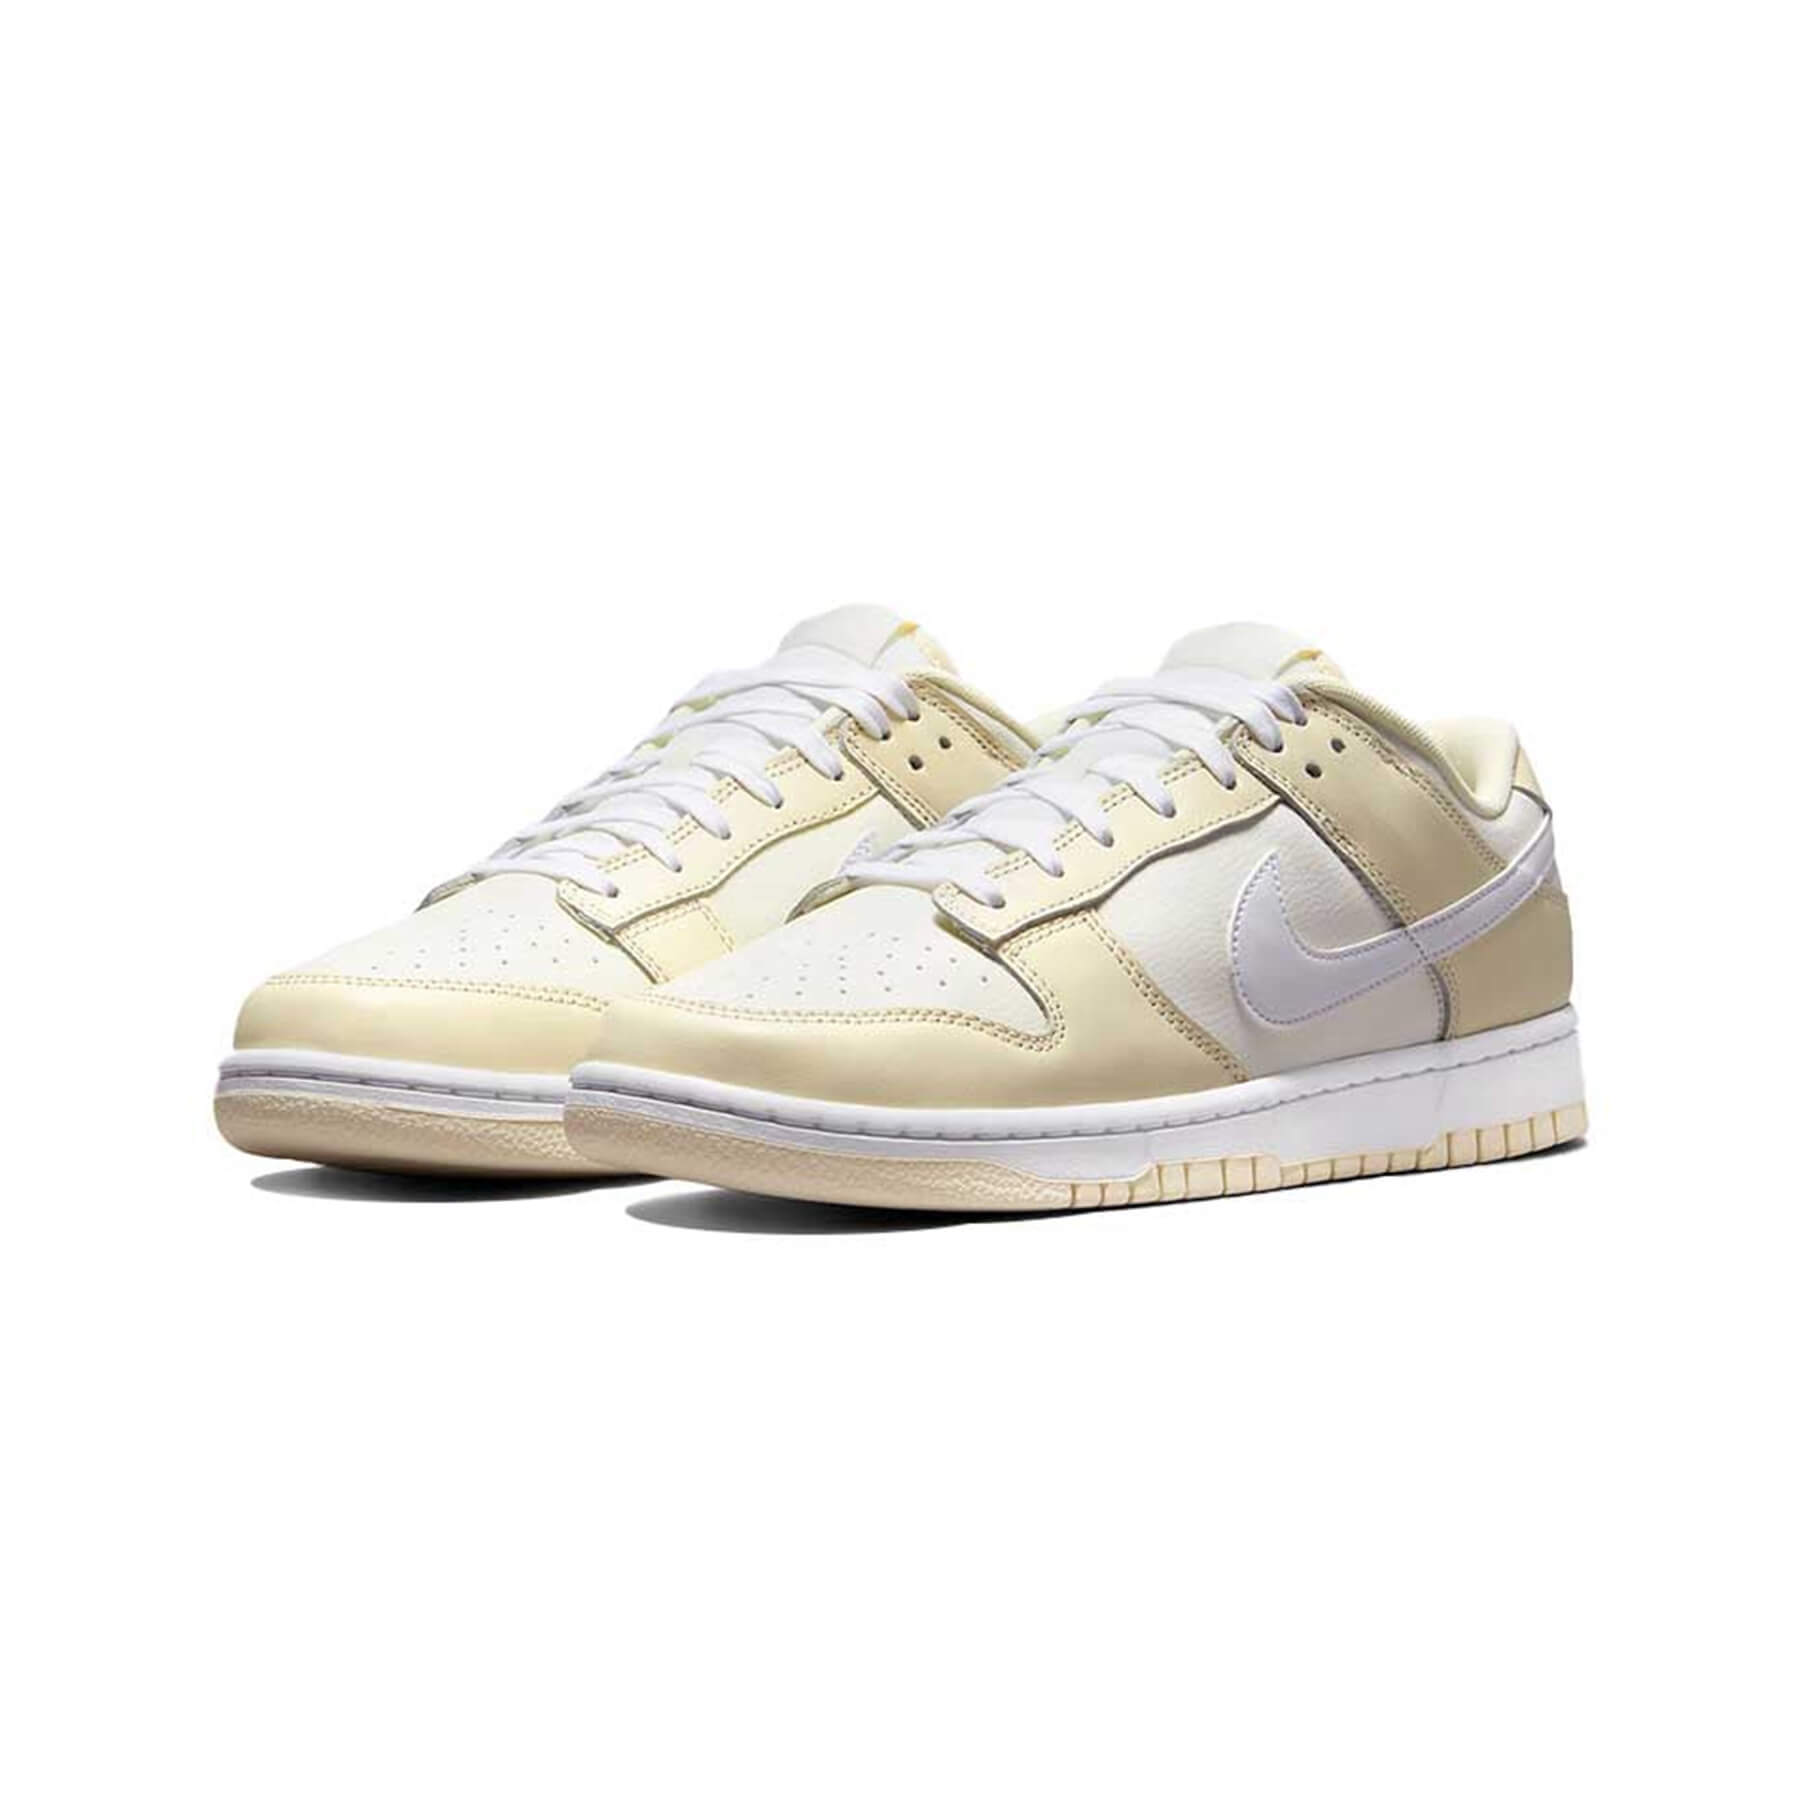 Nike Dunk Low Coconut Milk - Fast Delivery